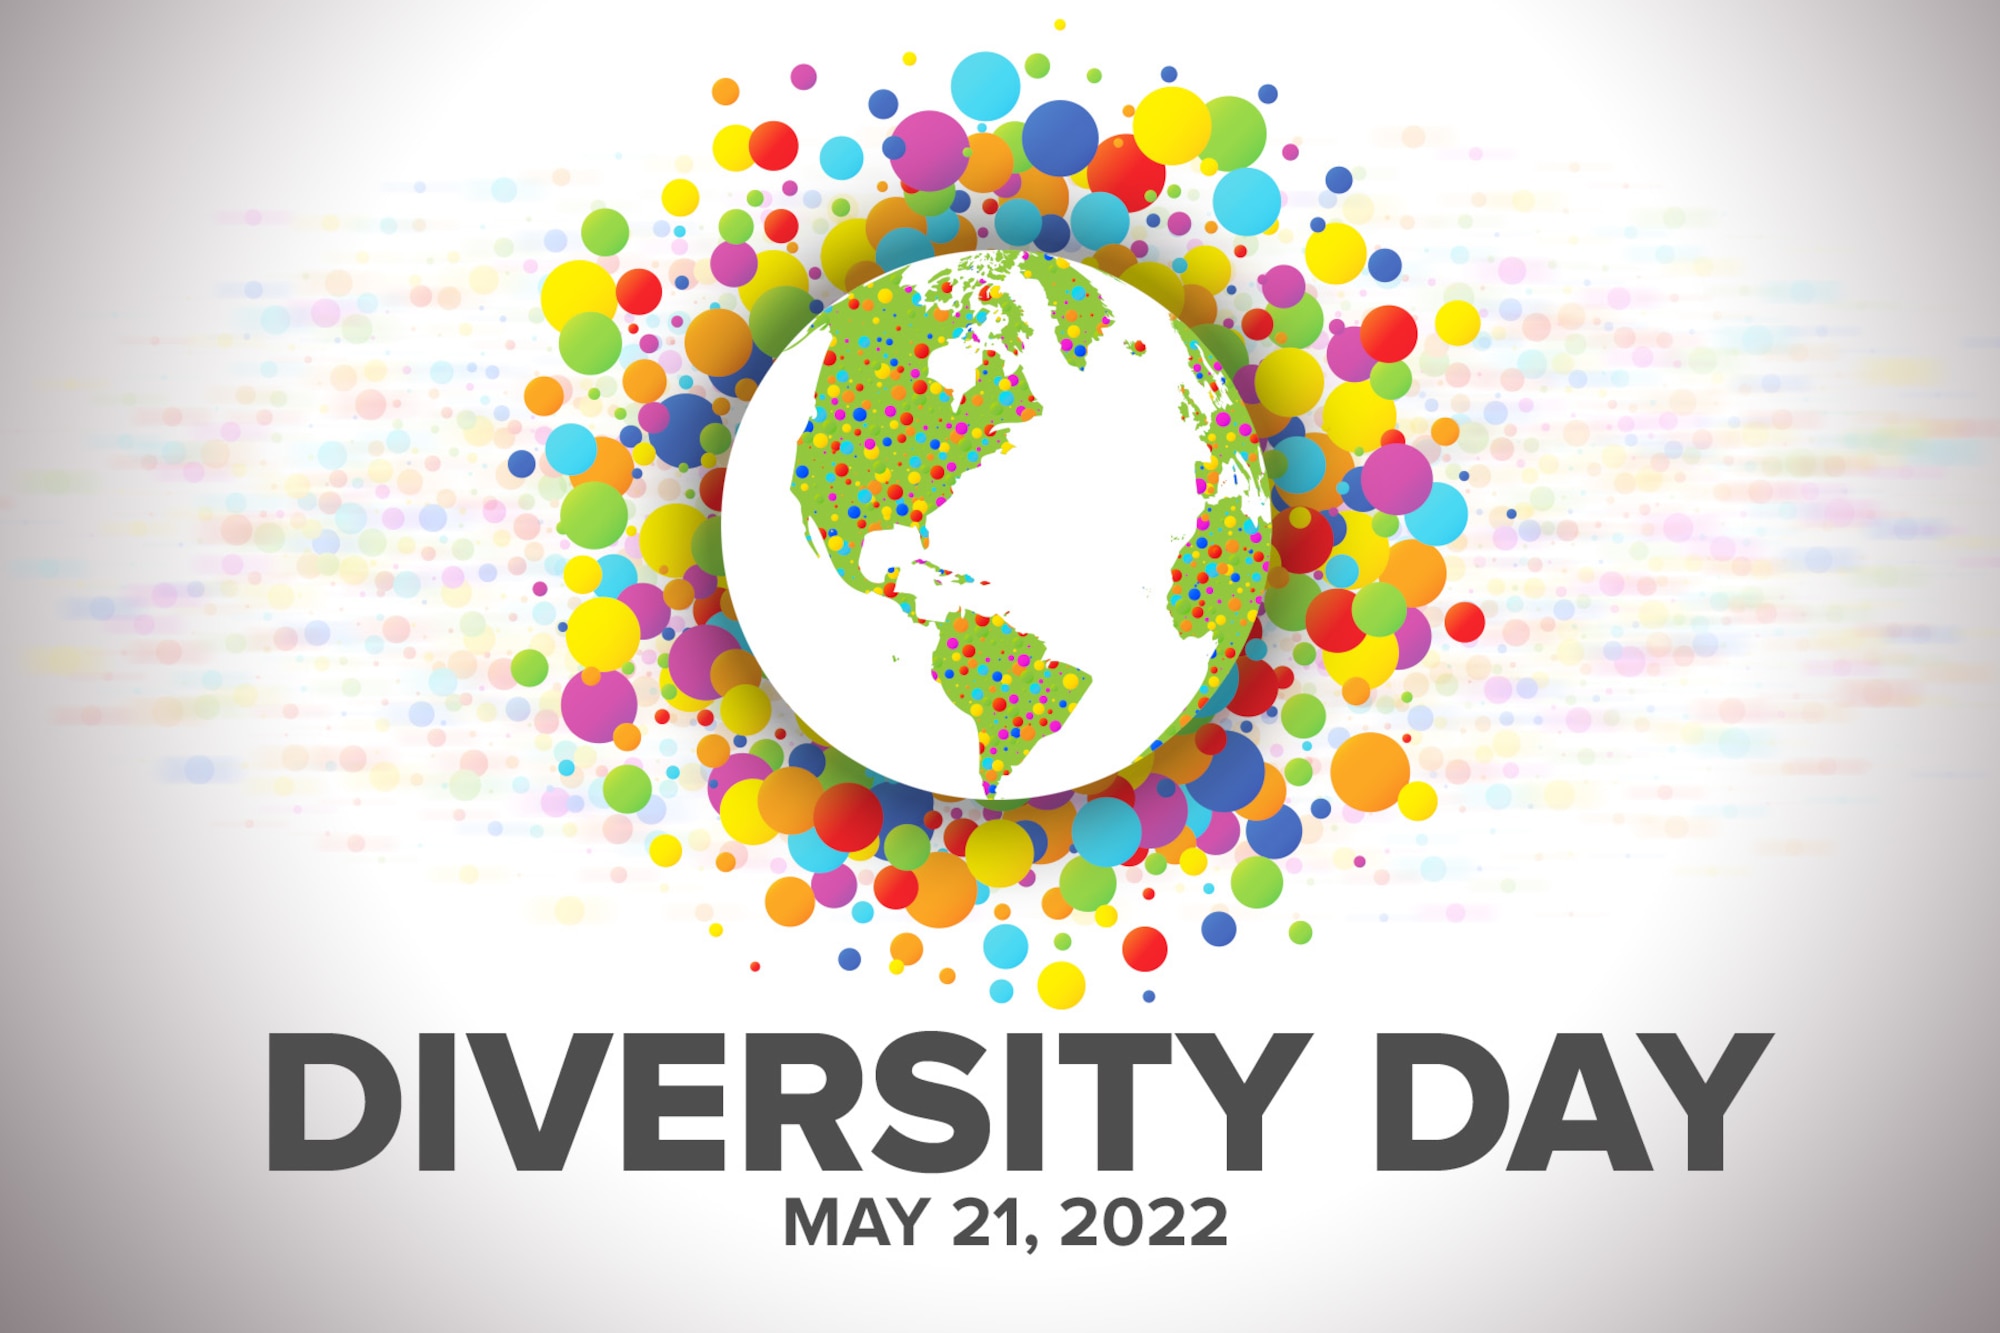 The words Diversity Day appear below an image of the globe and its continents are speckled with brightly colored polkadots.